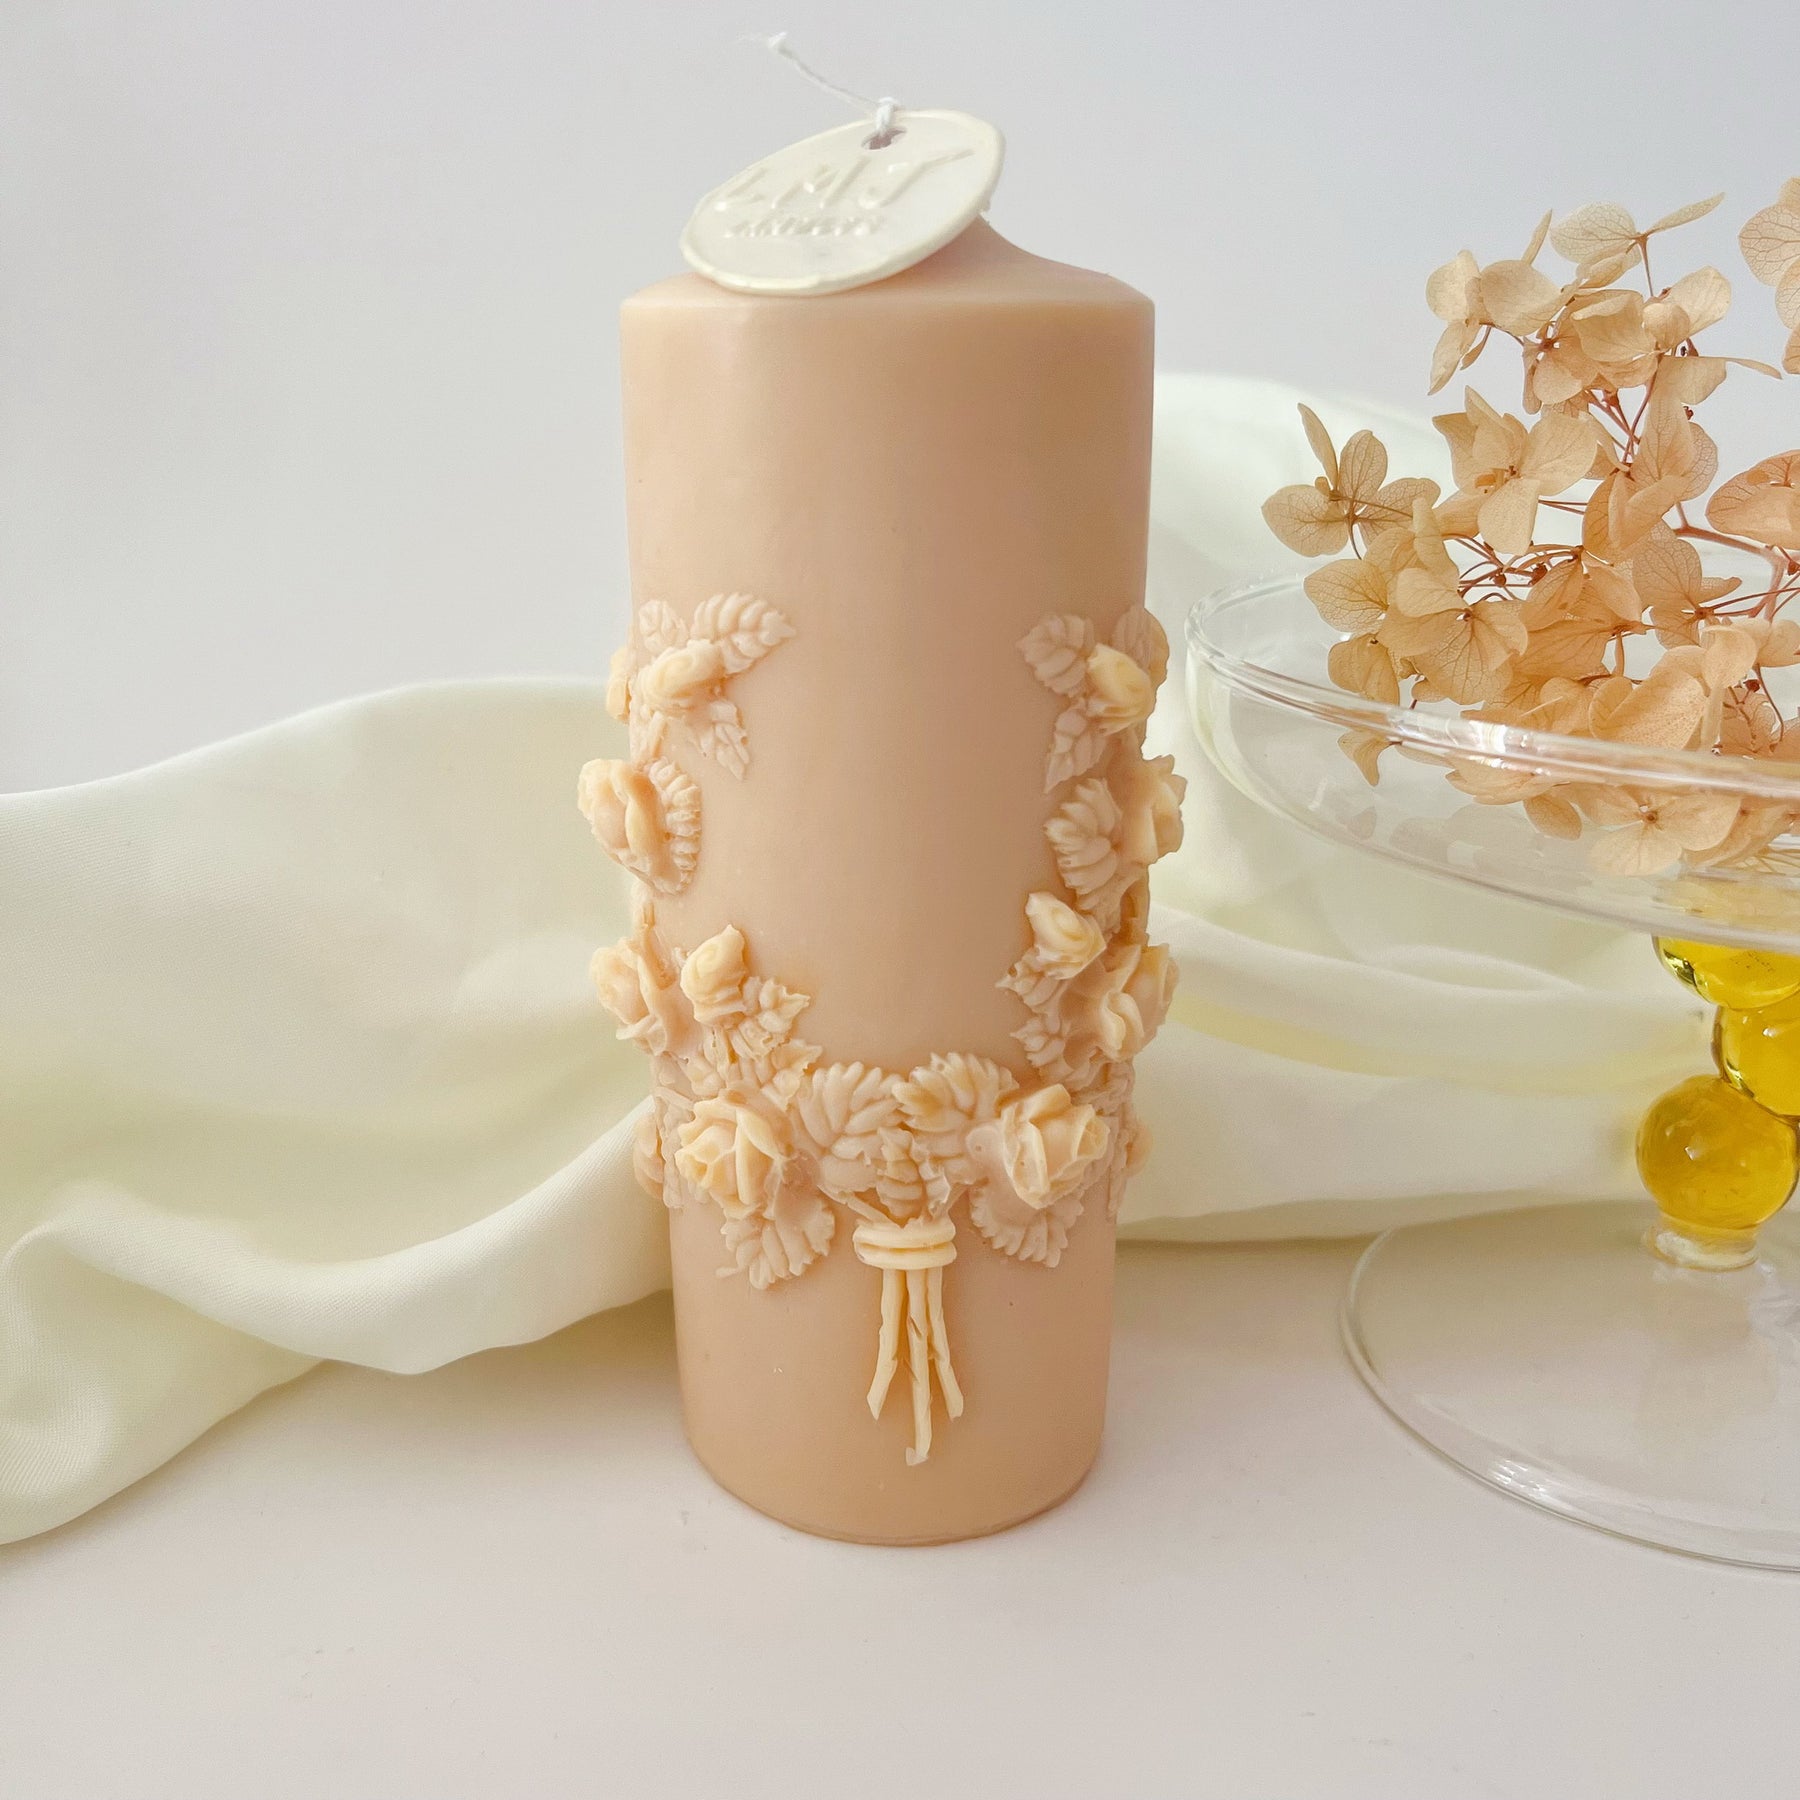 Flower Wreath Pillar Candle - Scented Soy Wax Candle | LMJ Candles